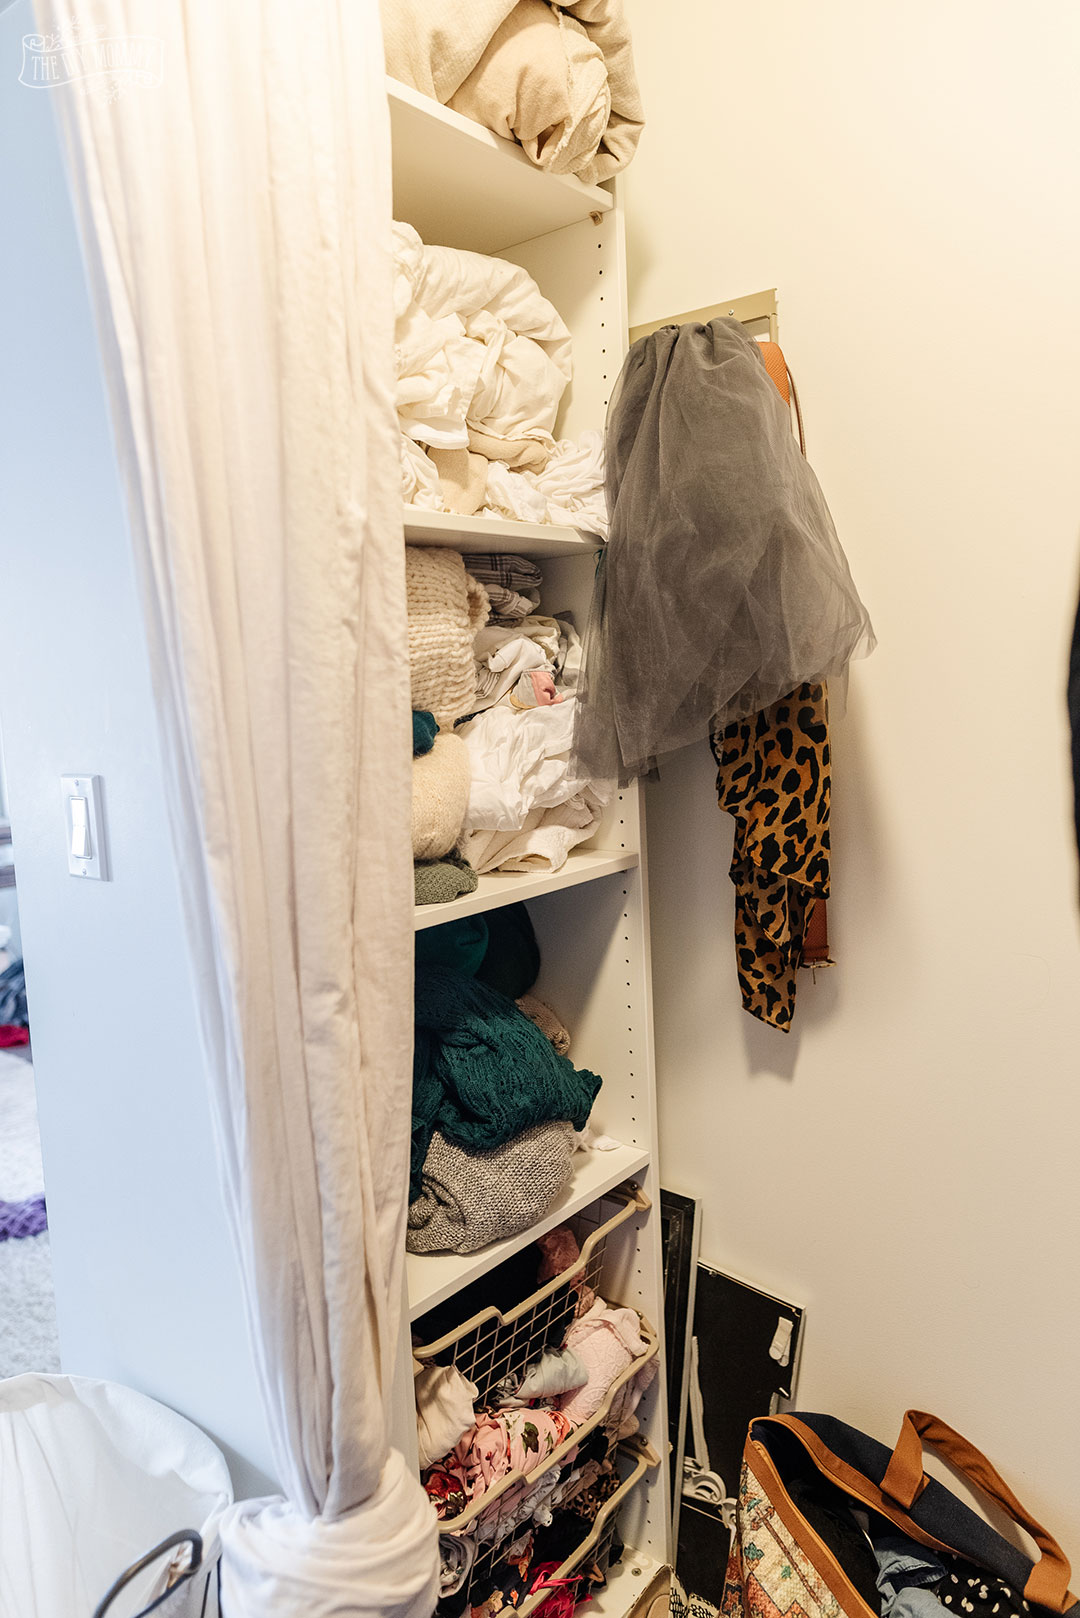 Before and after of a small walk-in closet transformed with DIY IKEA Pax units